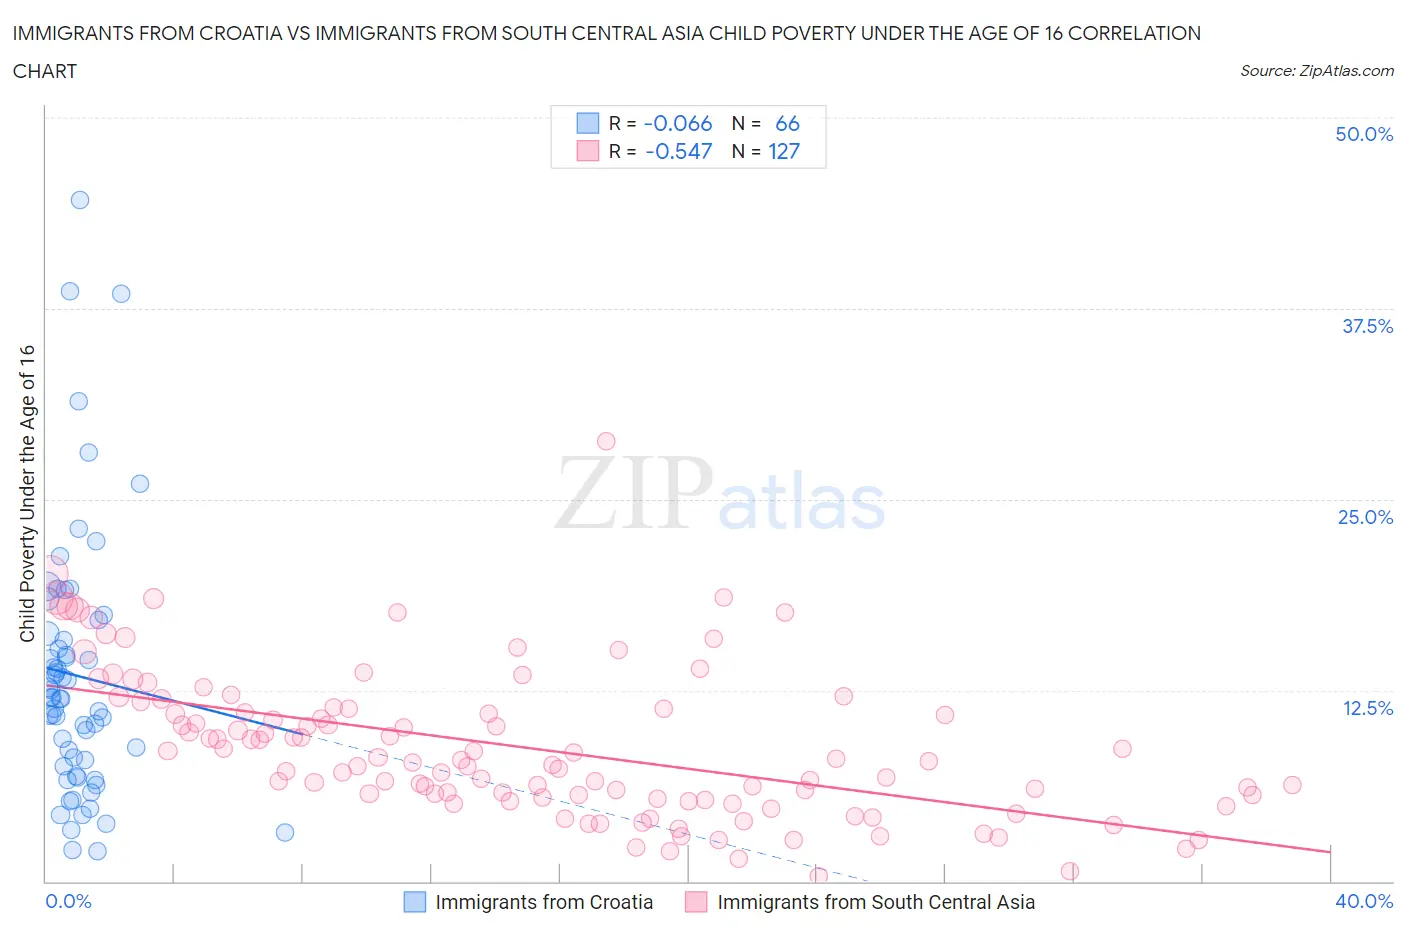 Immigrants from Croatia vs Immigrants from South Central Asia Child Poverty Under the Age of 16